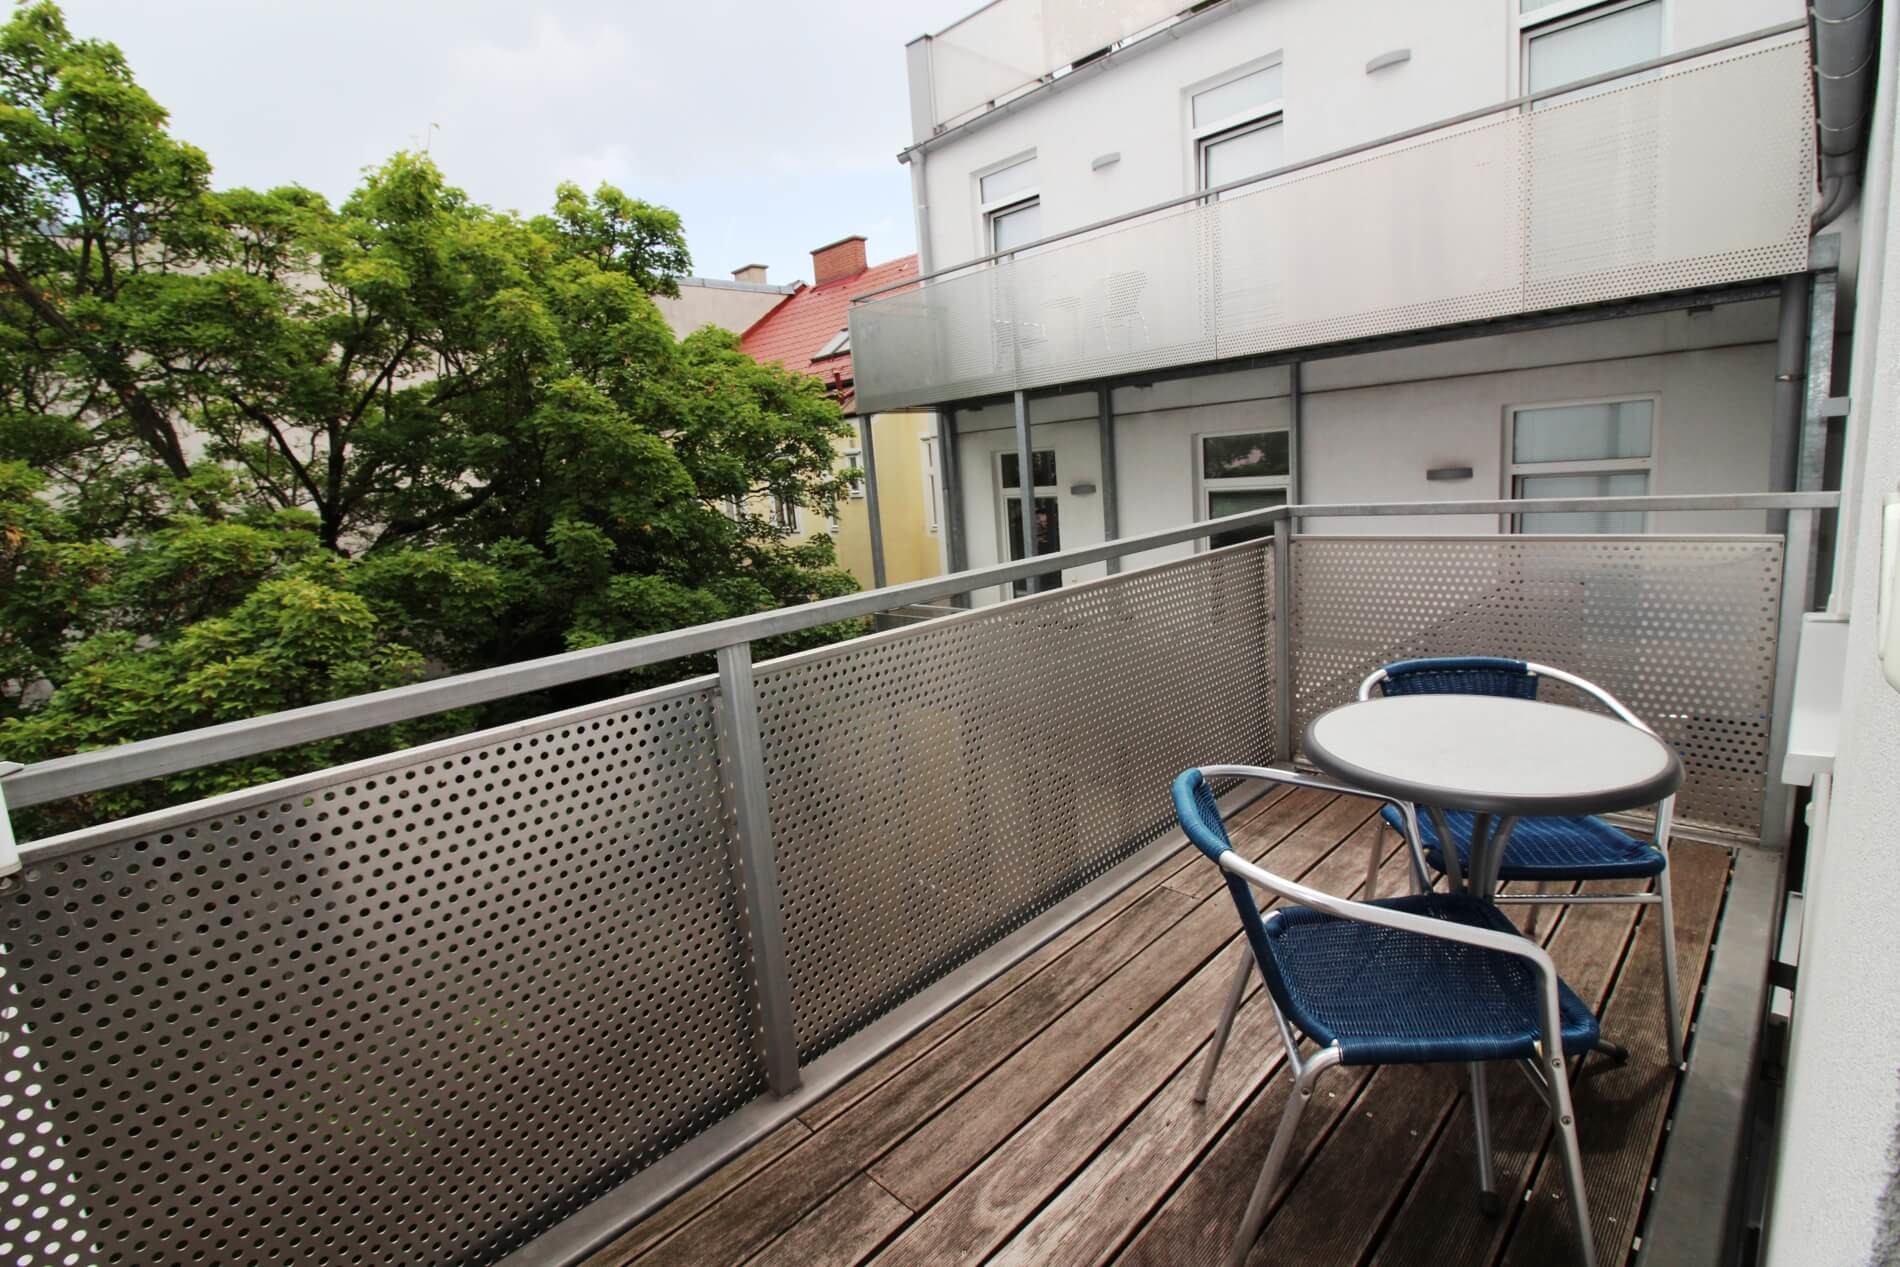 Completely furnished 2-bedroom apartment with Balcony in Vienna (great location) 10